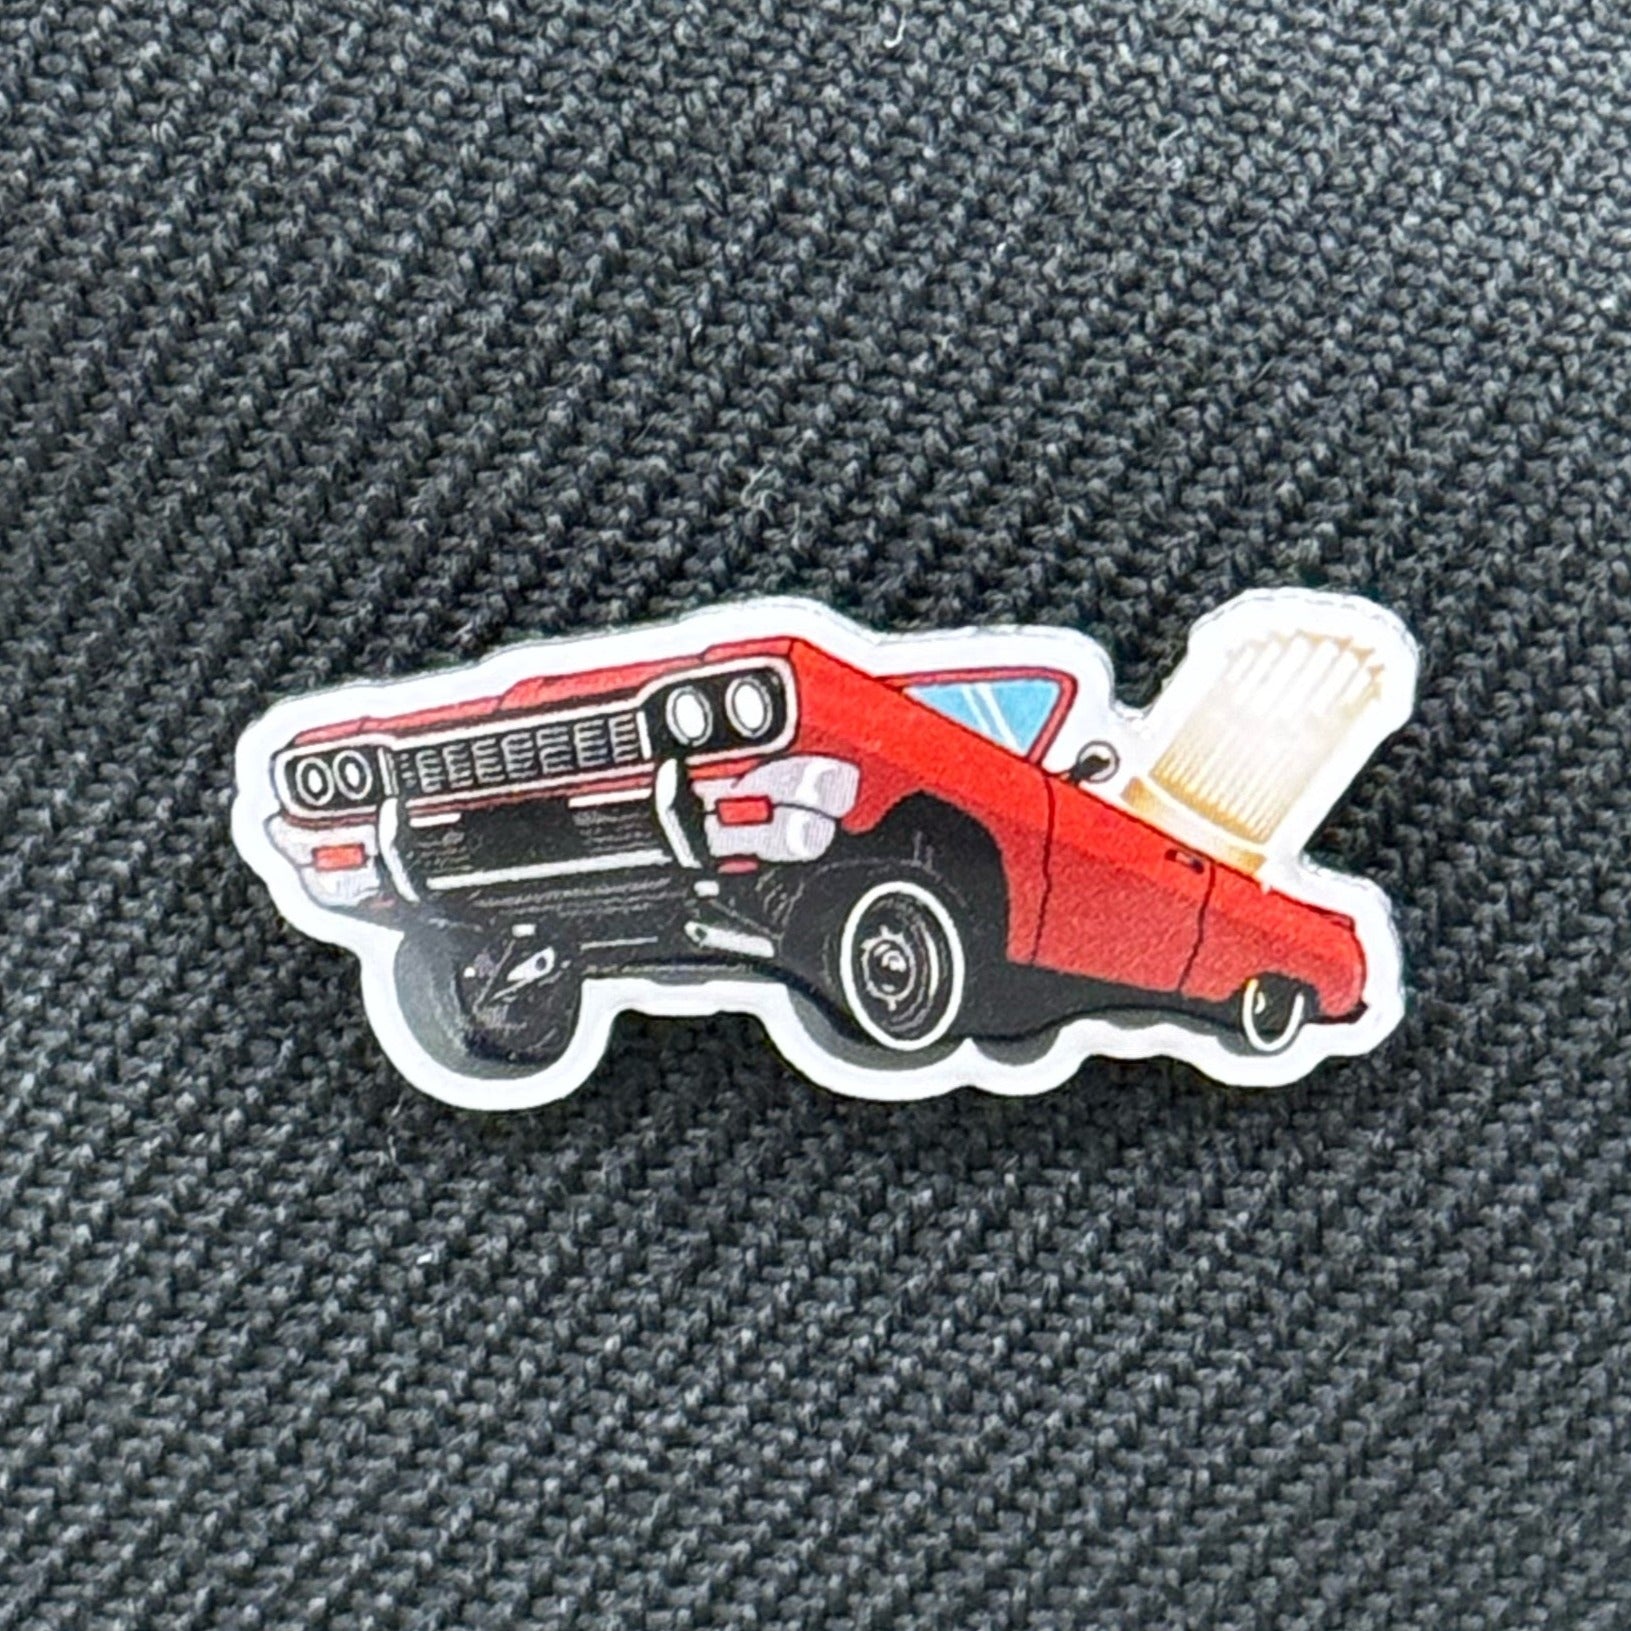 MIGHTY NYC LOW RIDER PIN